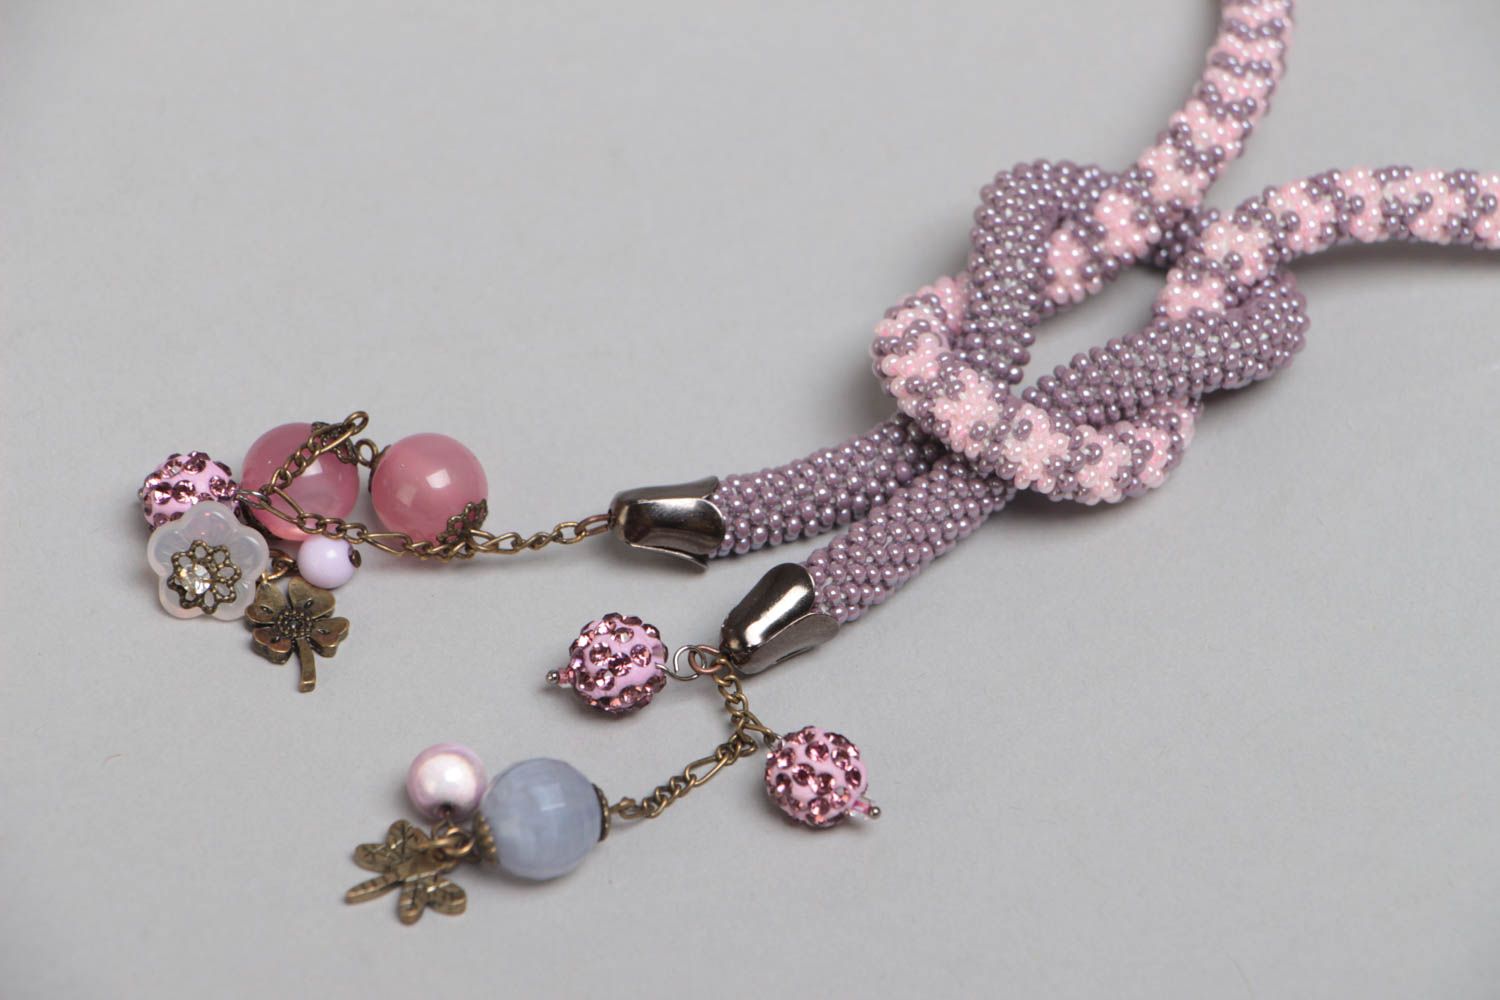 Handmade designer gray and pink beaded cord necklace with charms for women photo 3